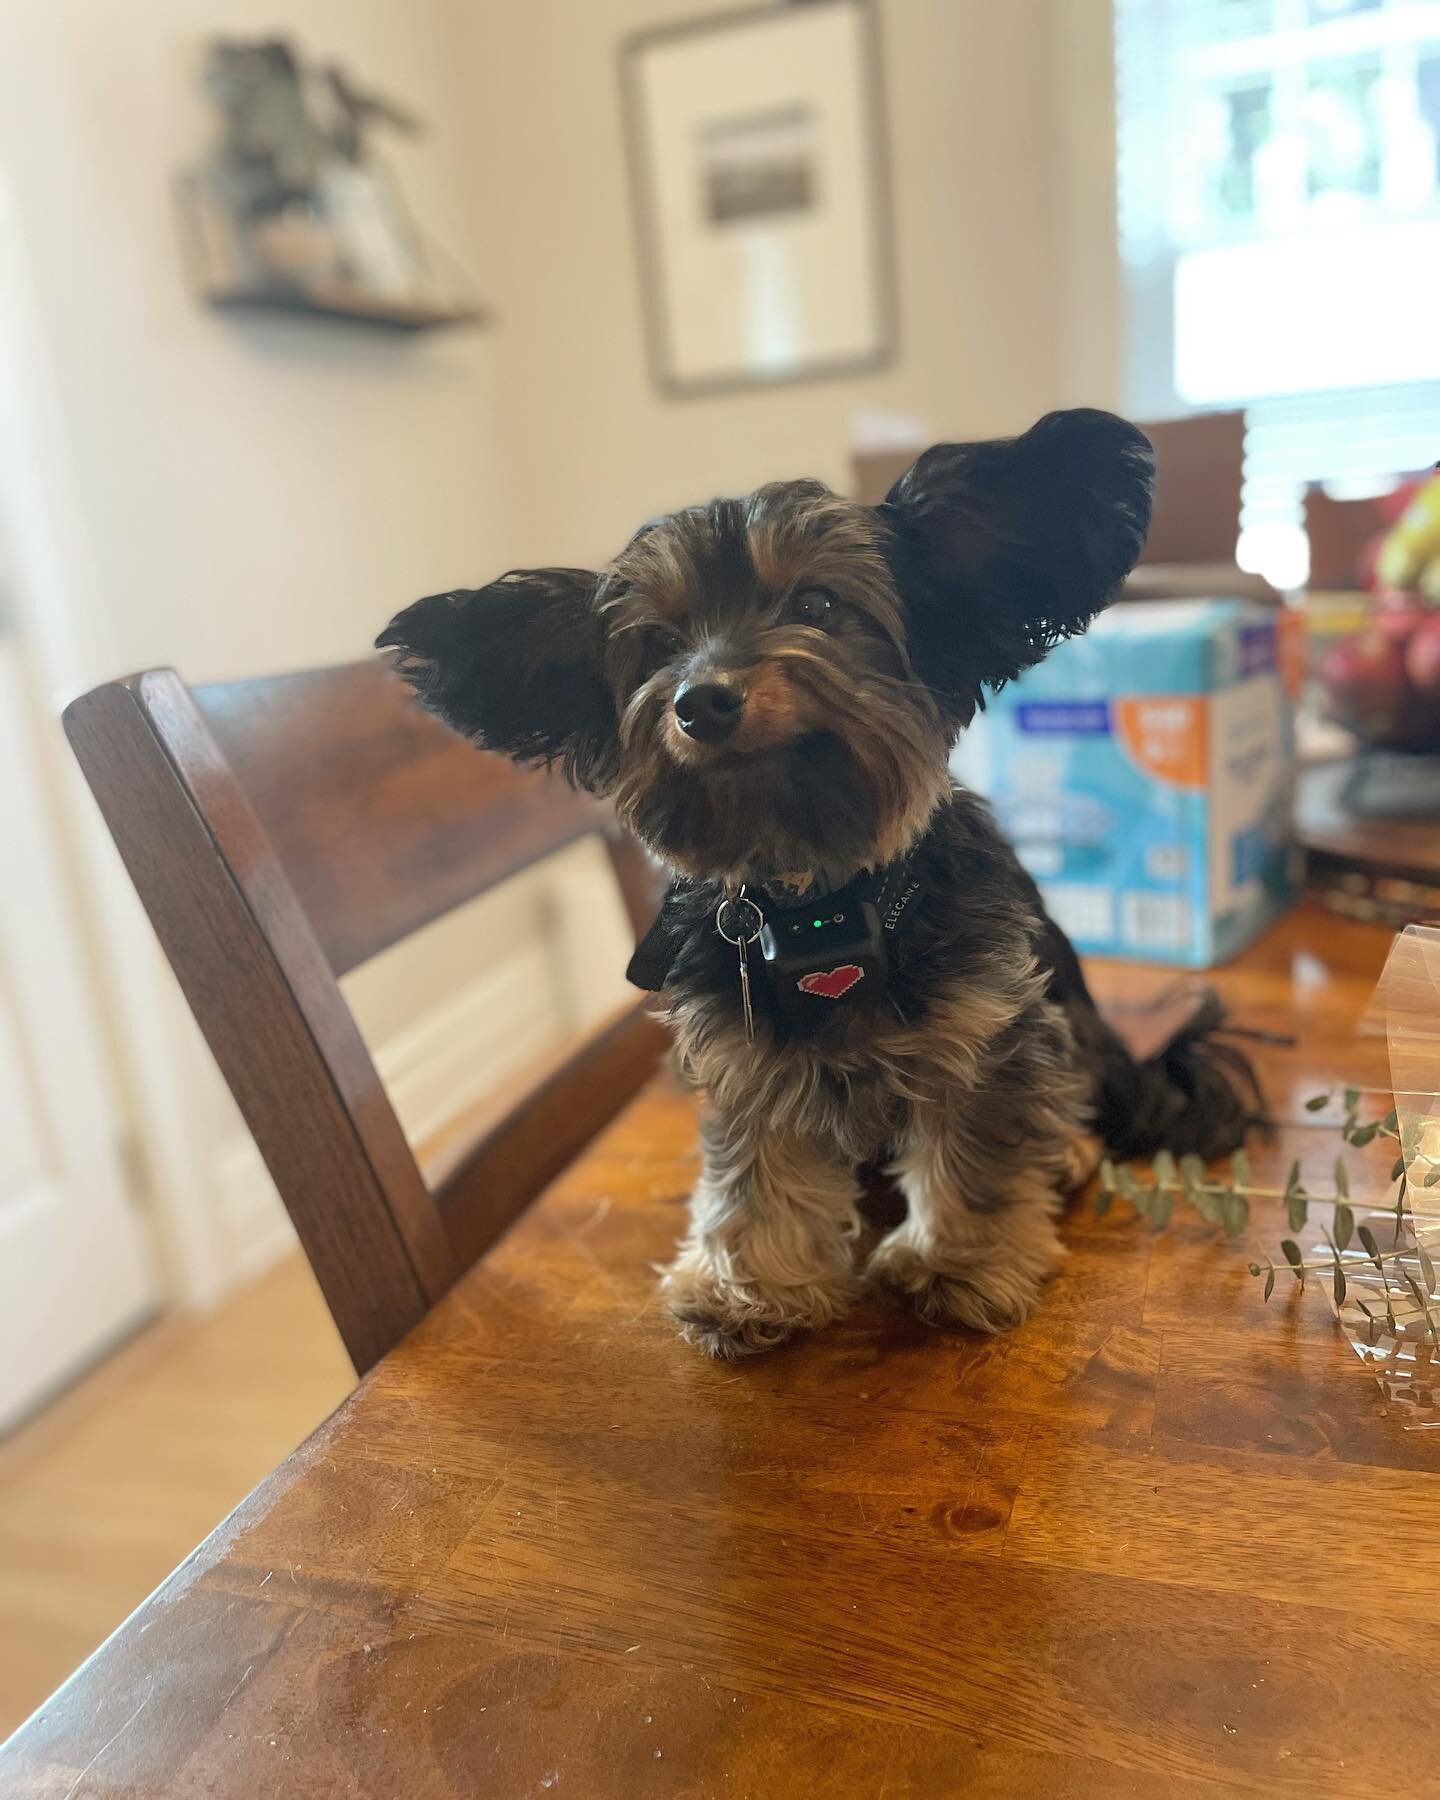 When you look up from your breakfast, and someone has decided to join you. #dogsofinstagram #dogsofthelou #yorkie #daushund #esa